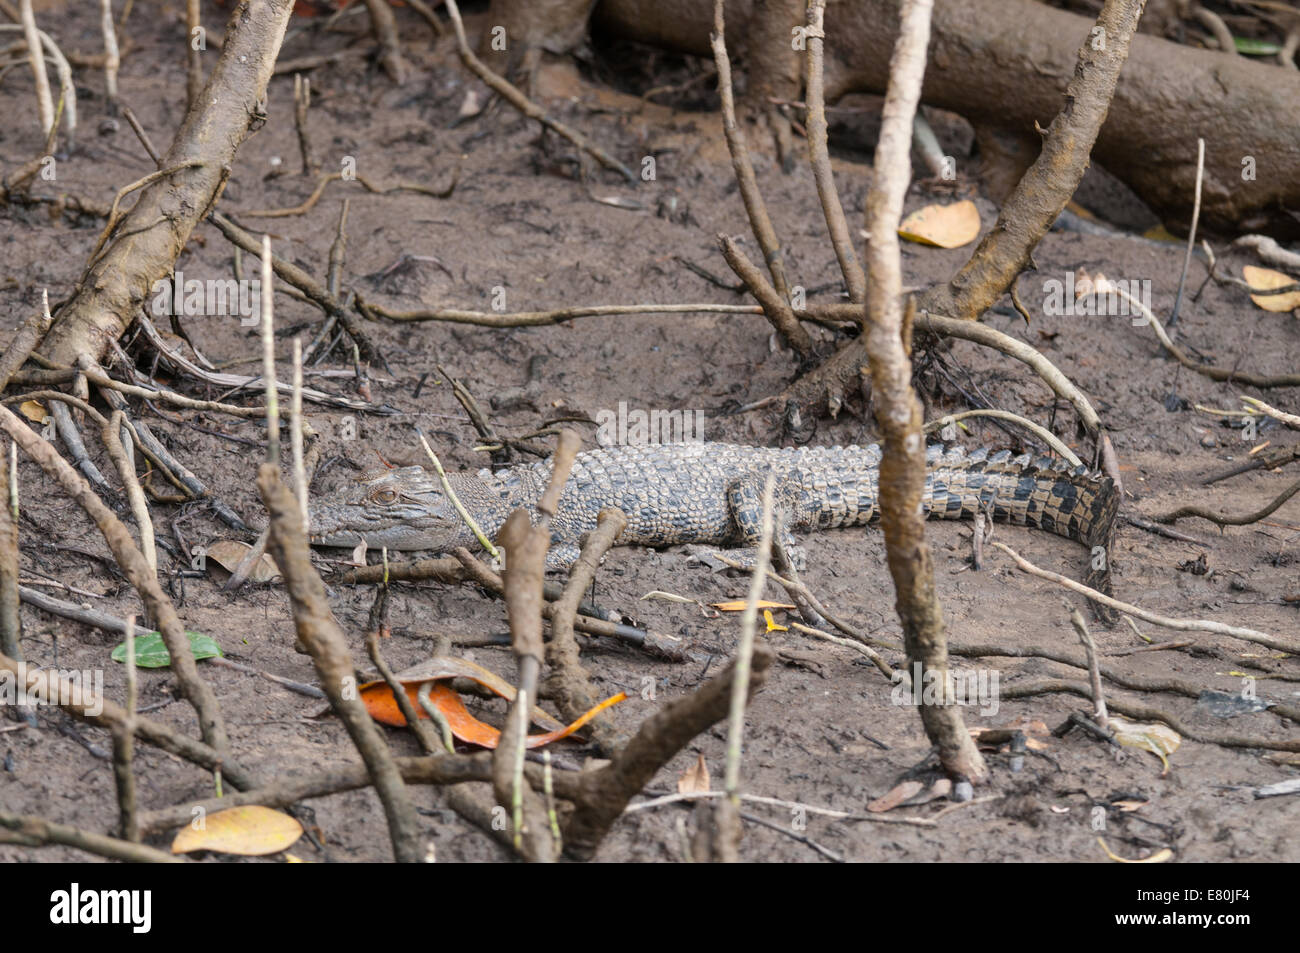 Stock photo of a saltwater crocodile resting on the riverbank. Stock Photo